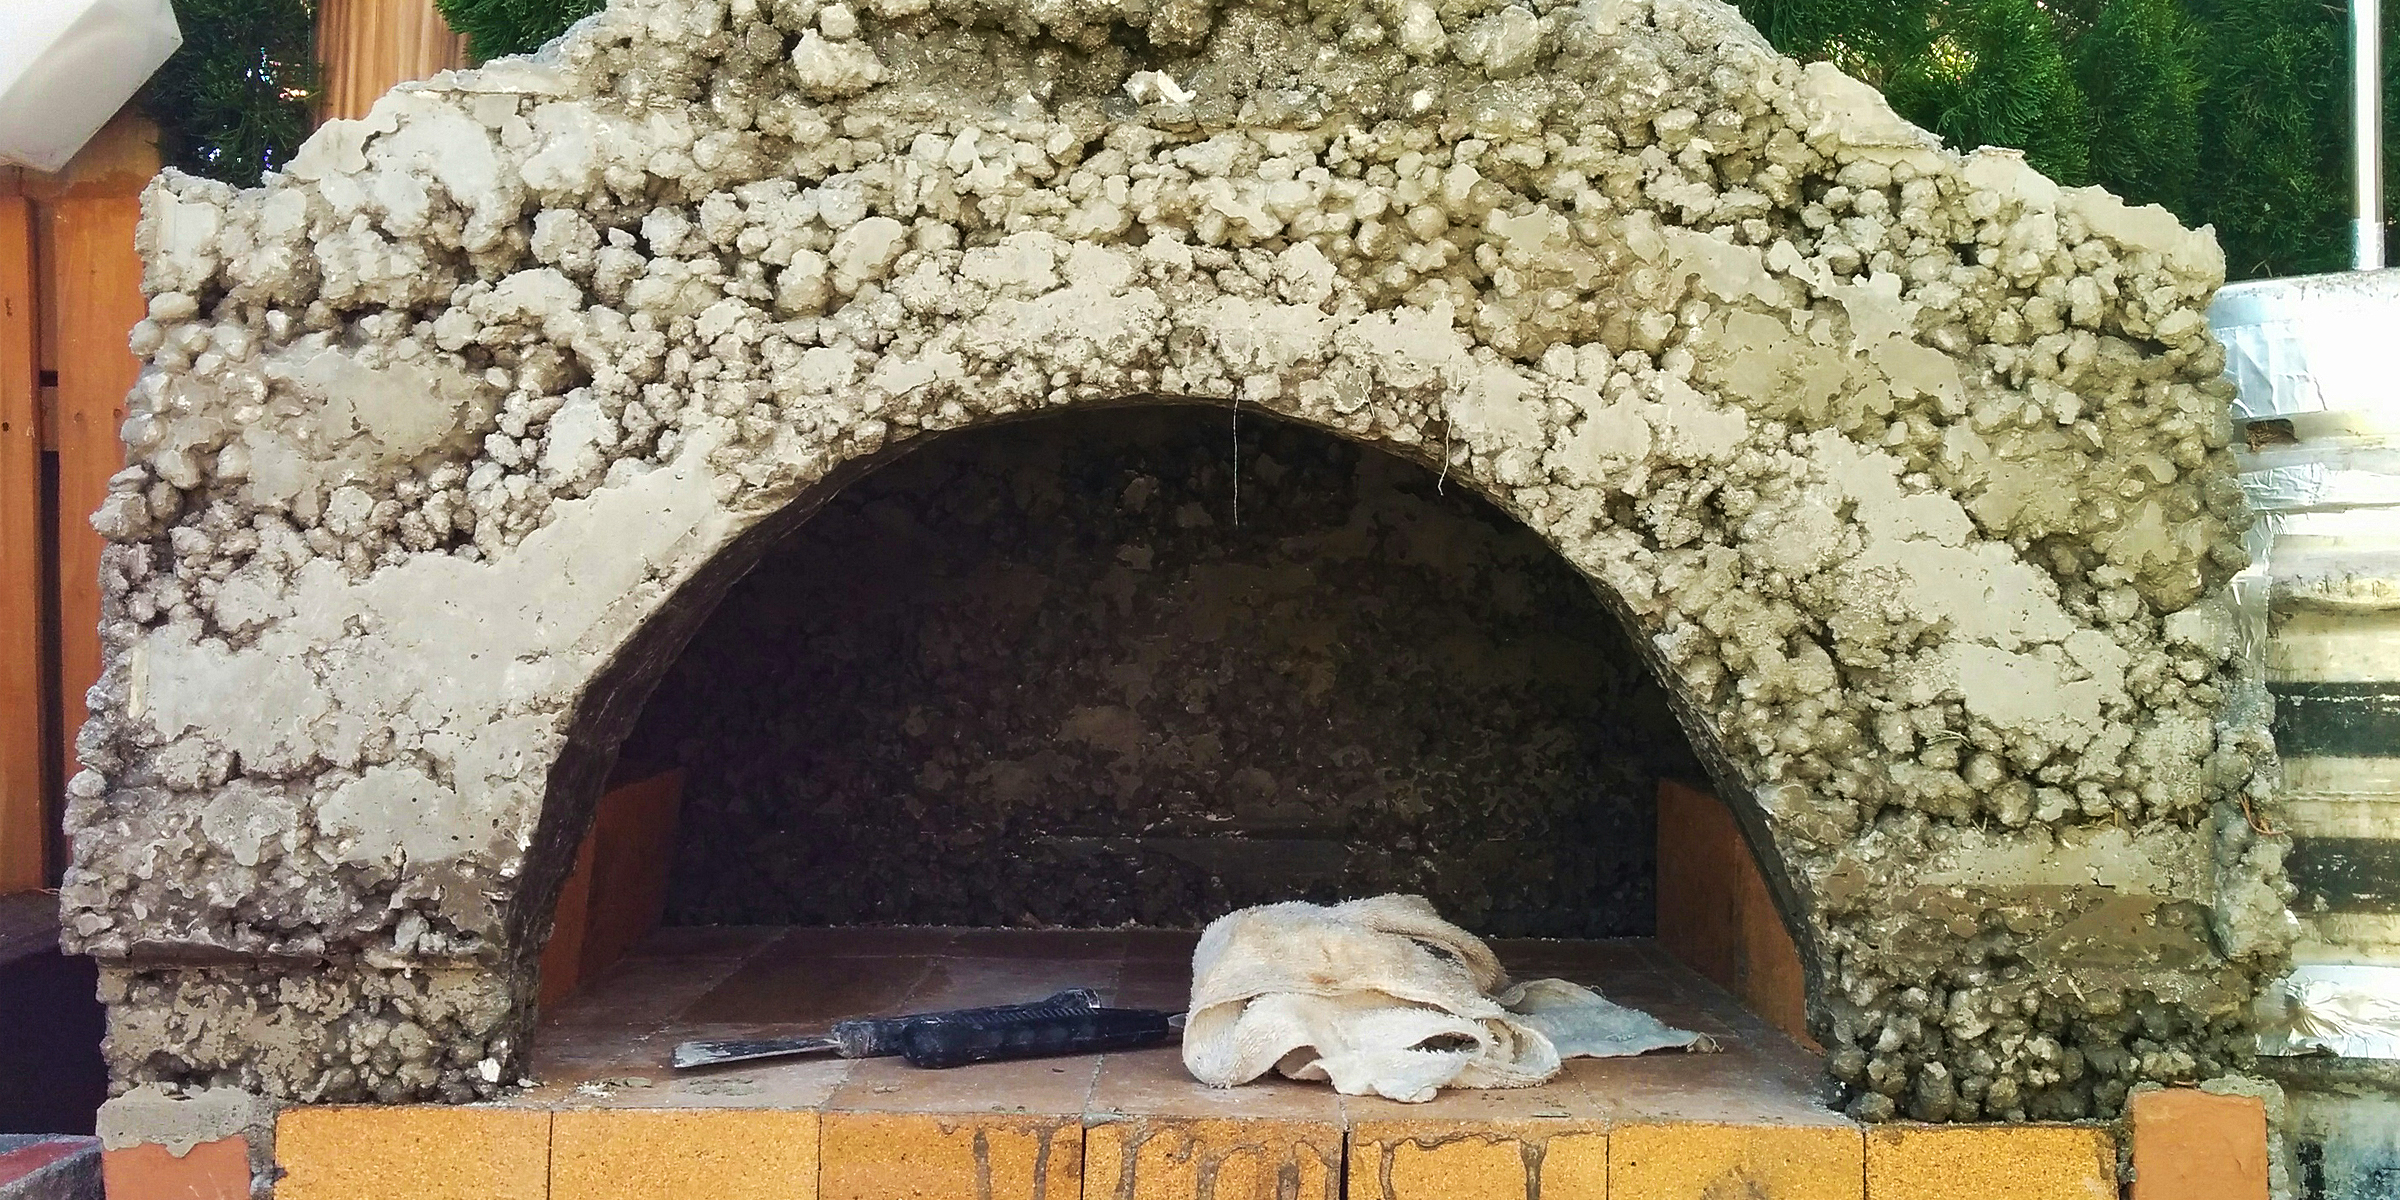 A DIY pizza oven | Source: Getty Images